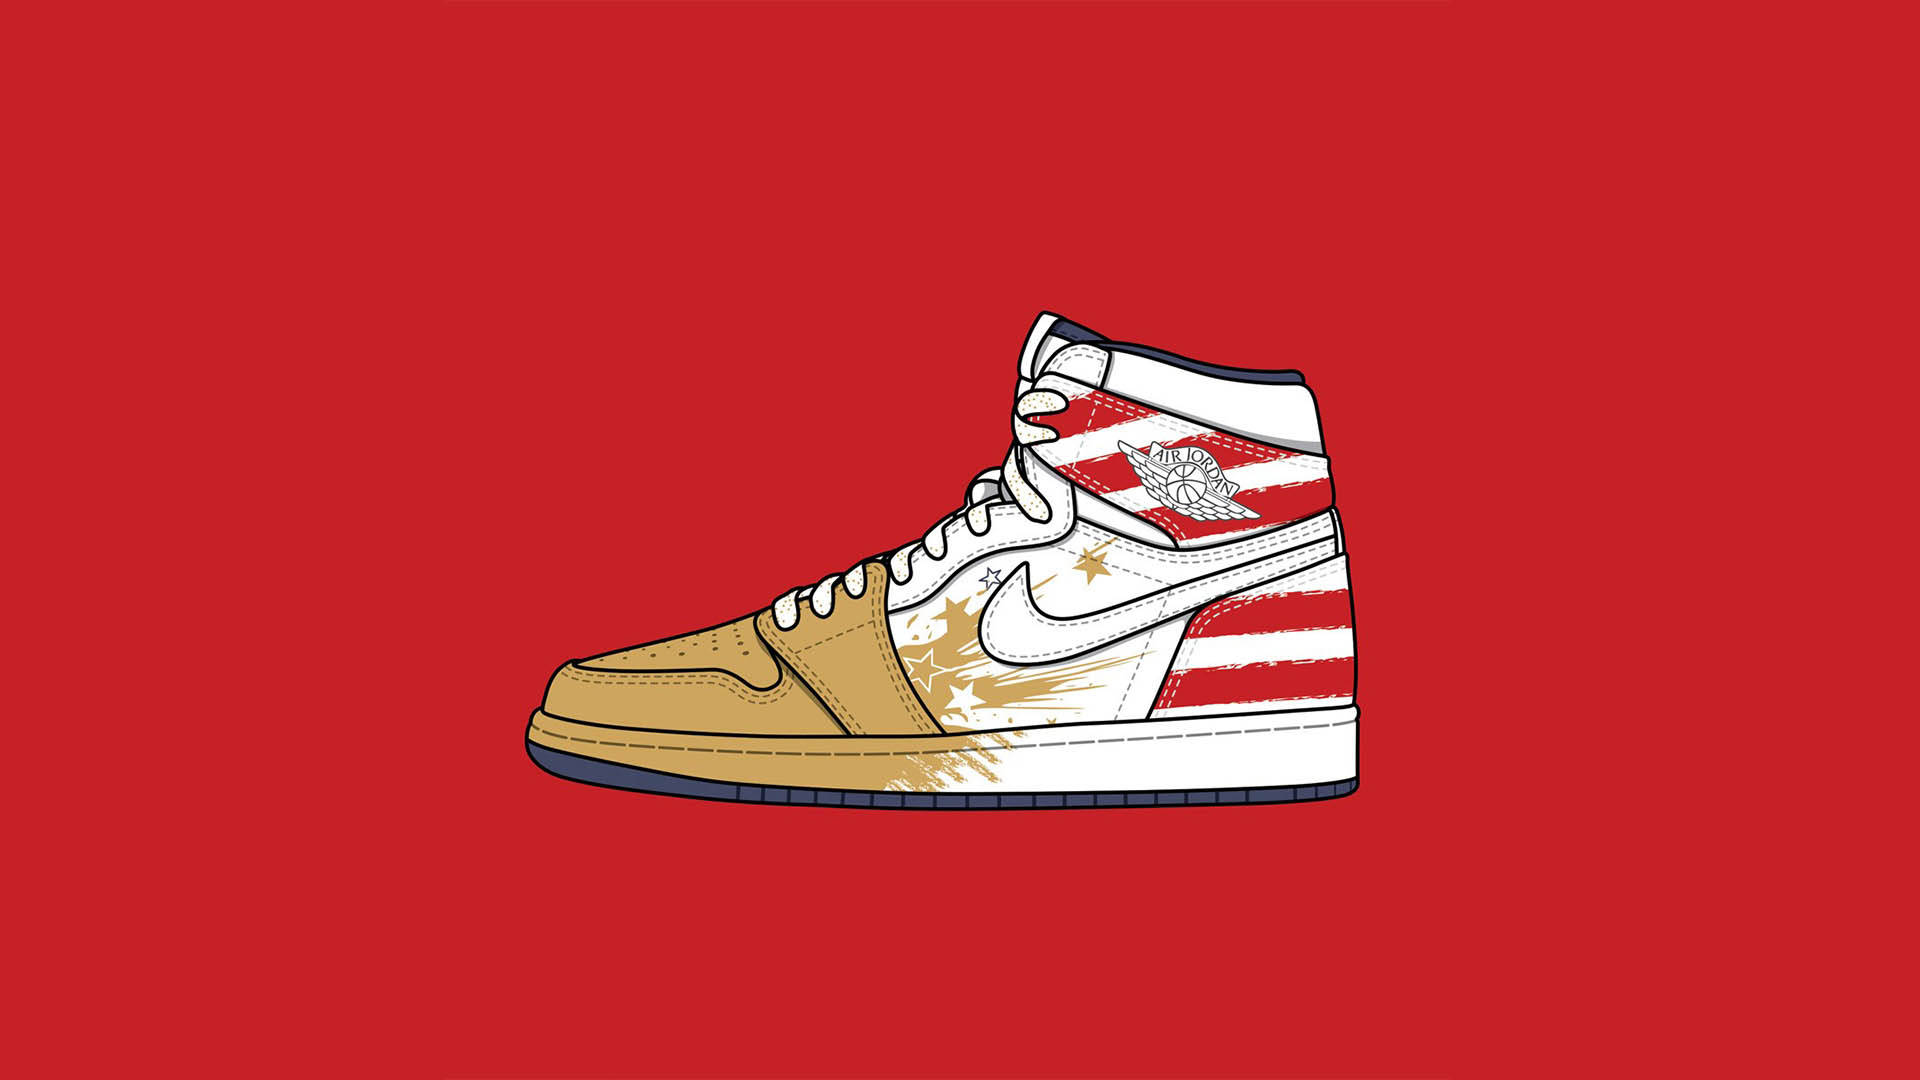 Nike Air Jordan 1 Wings For The Future Gold Background